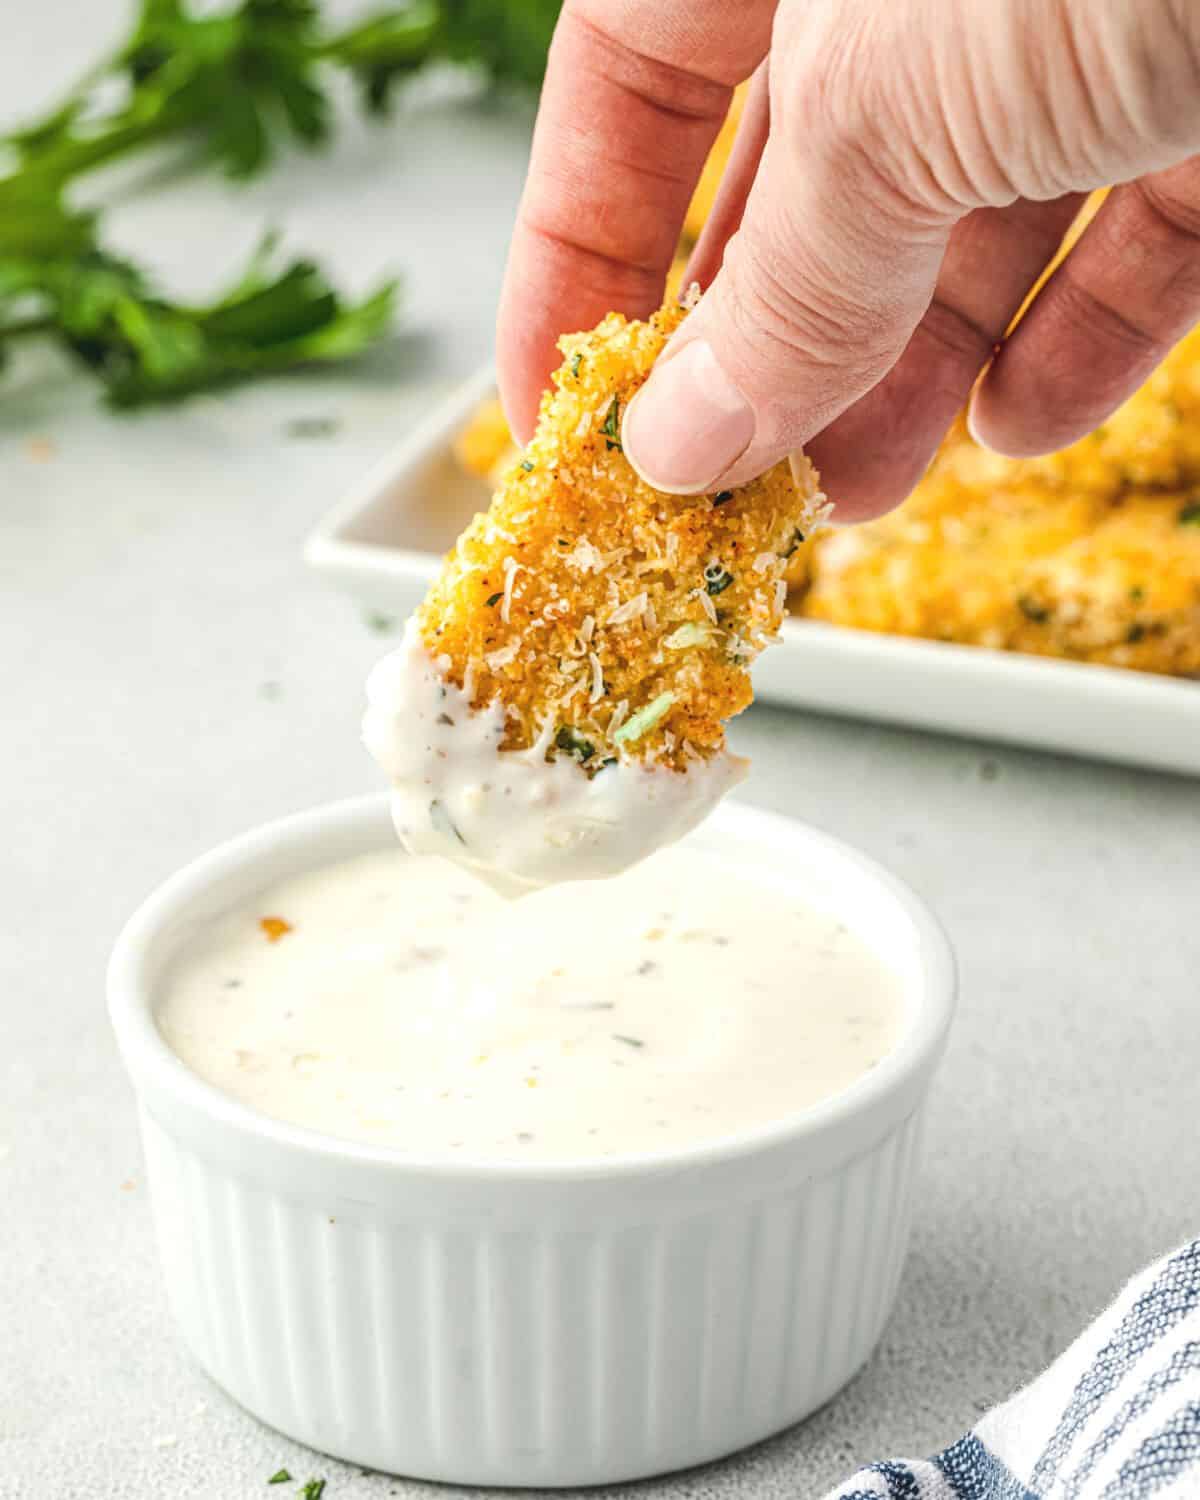 Dipping a crispy parmesan wing into Ranch dressing.